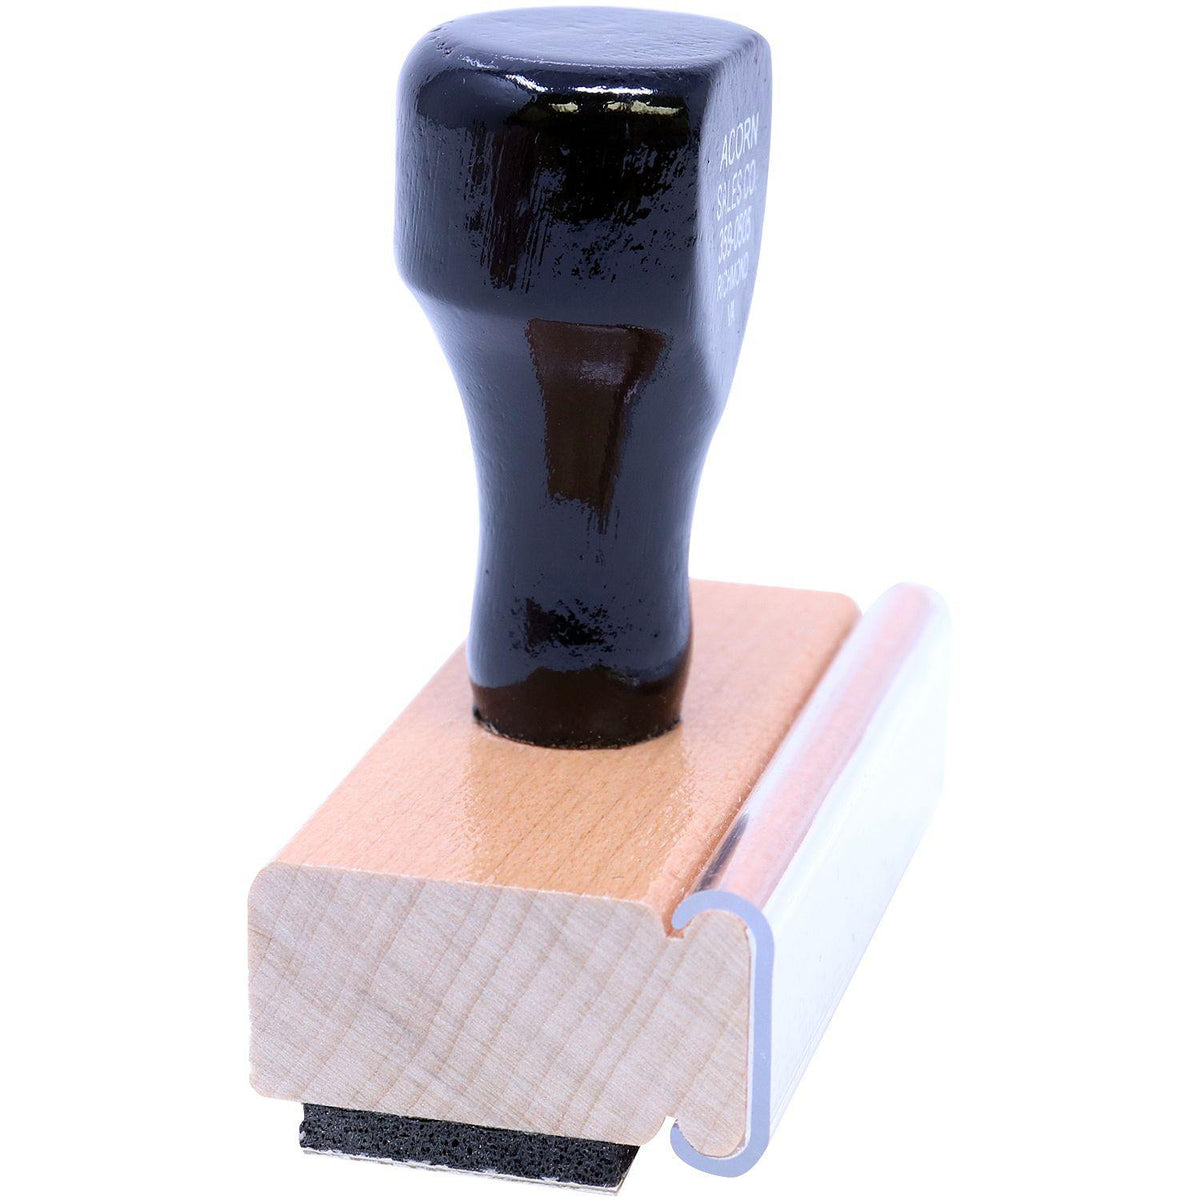 Side View of Large Name Rubber Stamp at an Angle